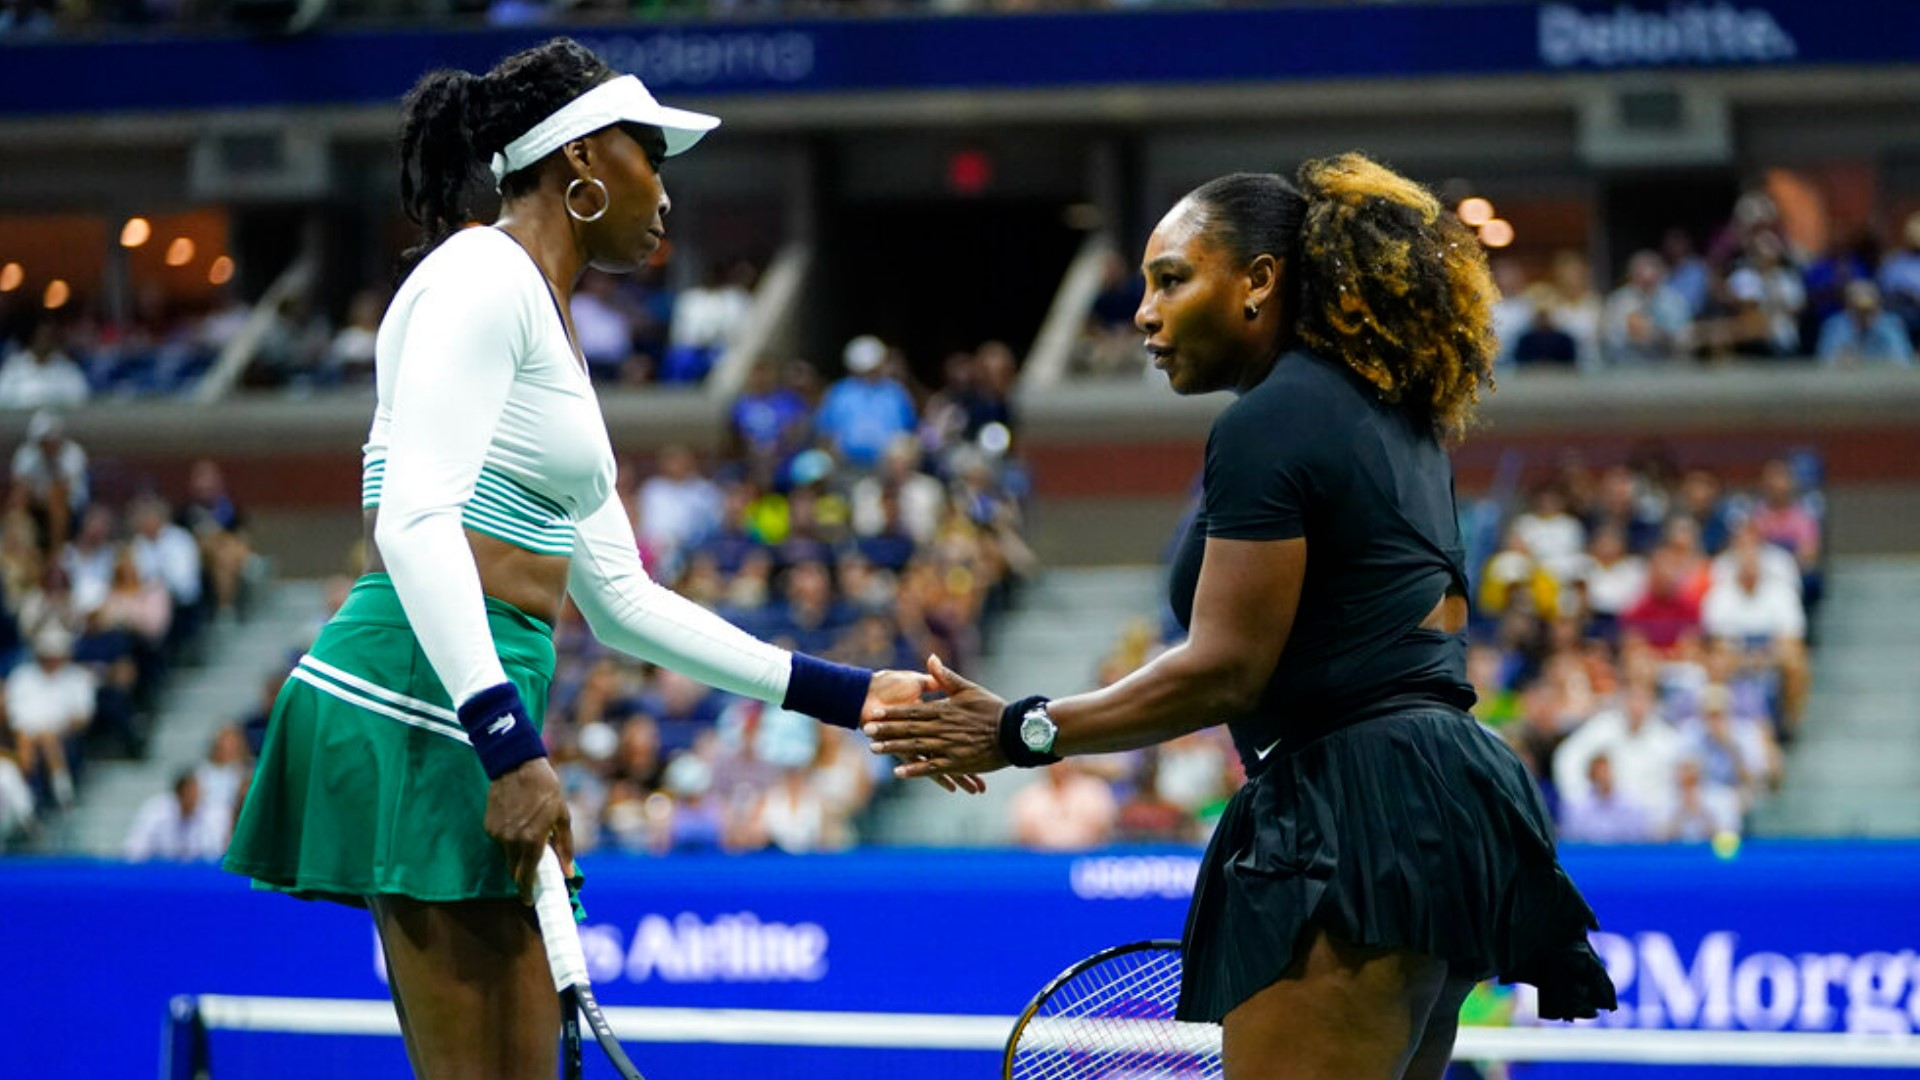 When the match ended, the sisters hugged each other. They left the court to a standing ovation.